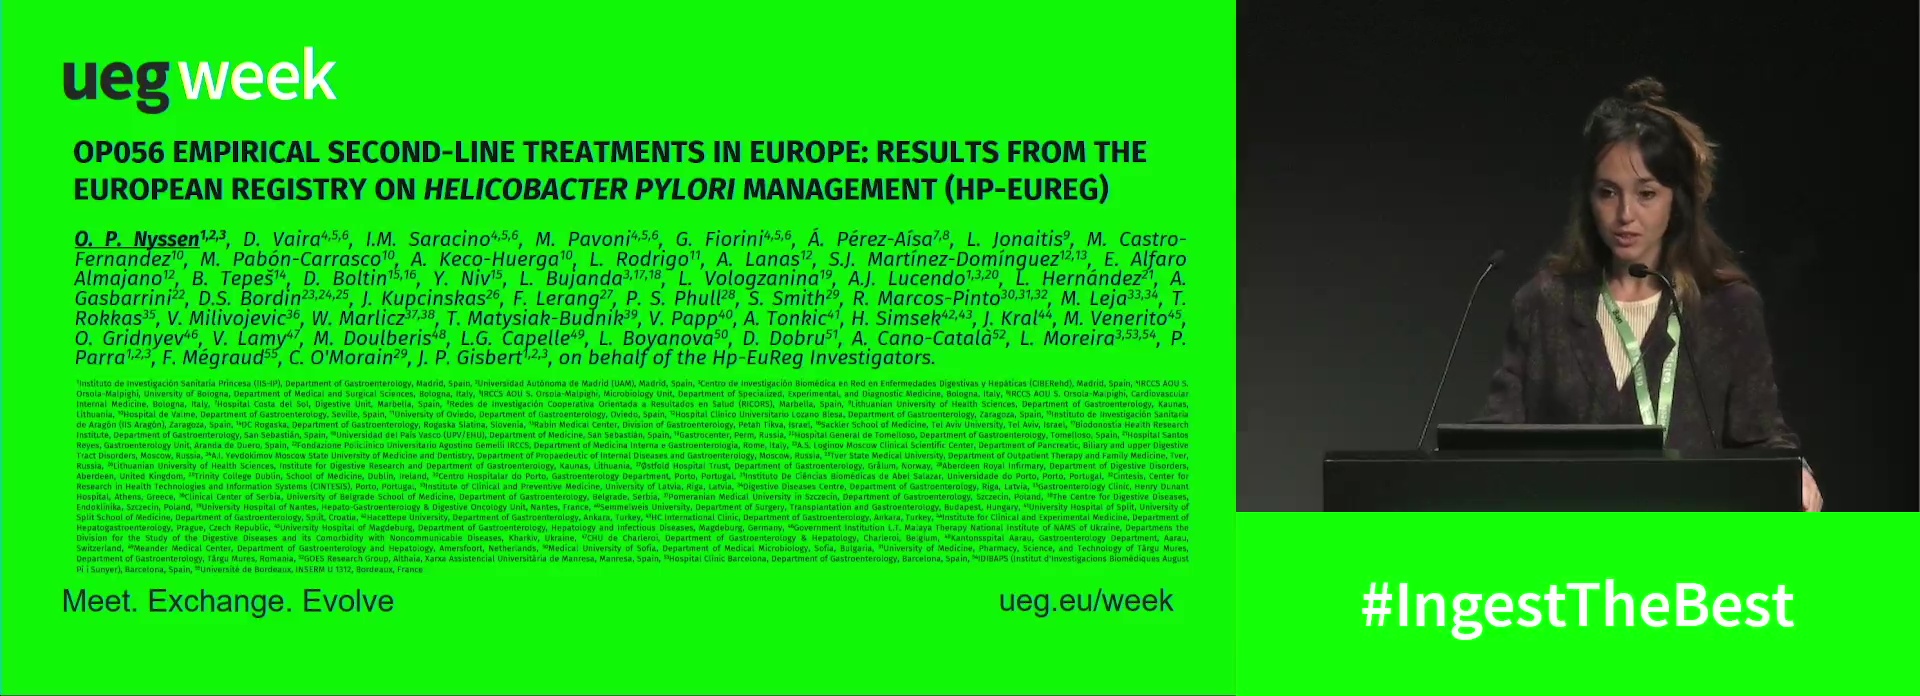 EMPIRICAL SECOND-LINE TREATMENTS IN EUROPE: RESULTS FROM THE EUROPEAN REGISTRY ON HELICOBACTER PYLORI MANAGEMENT (HP-EUREG)